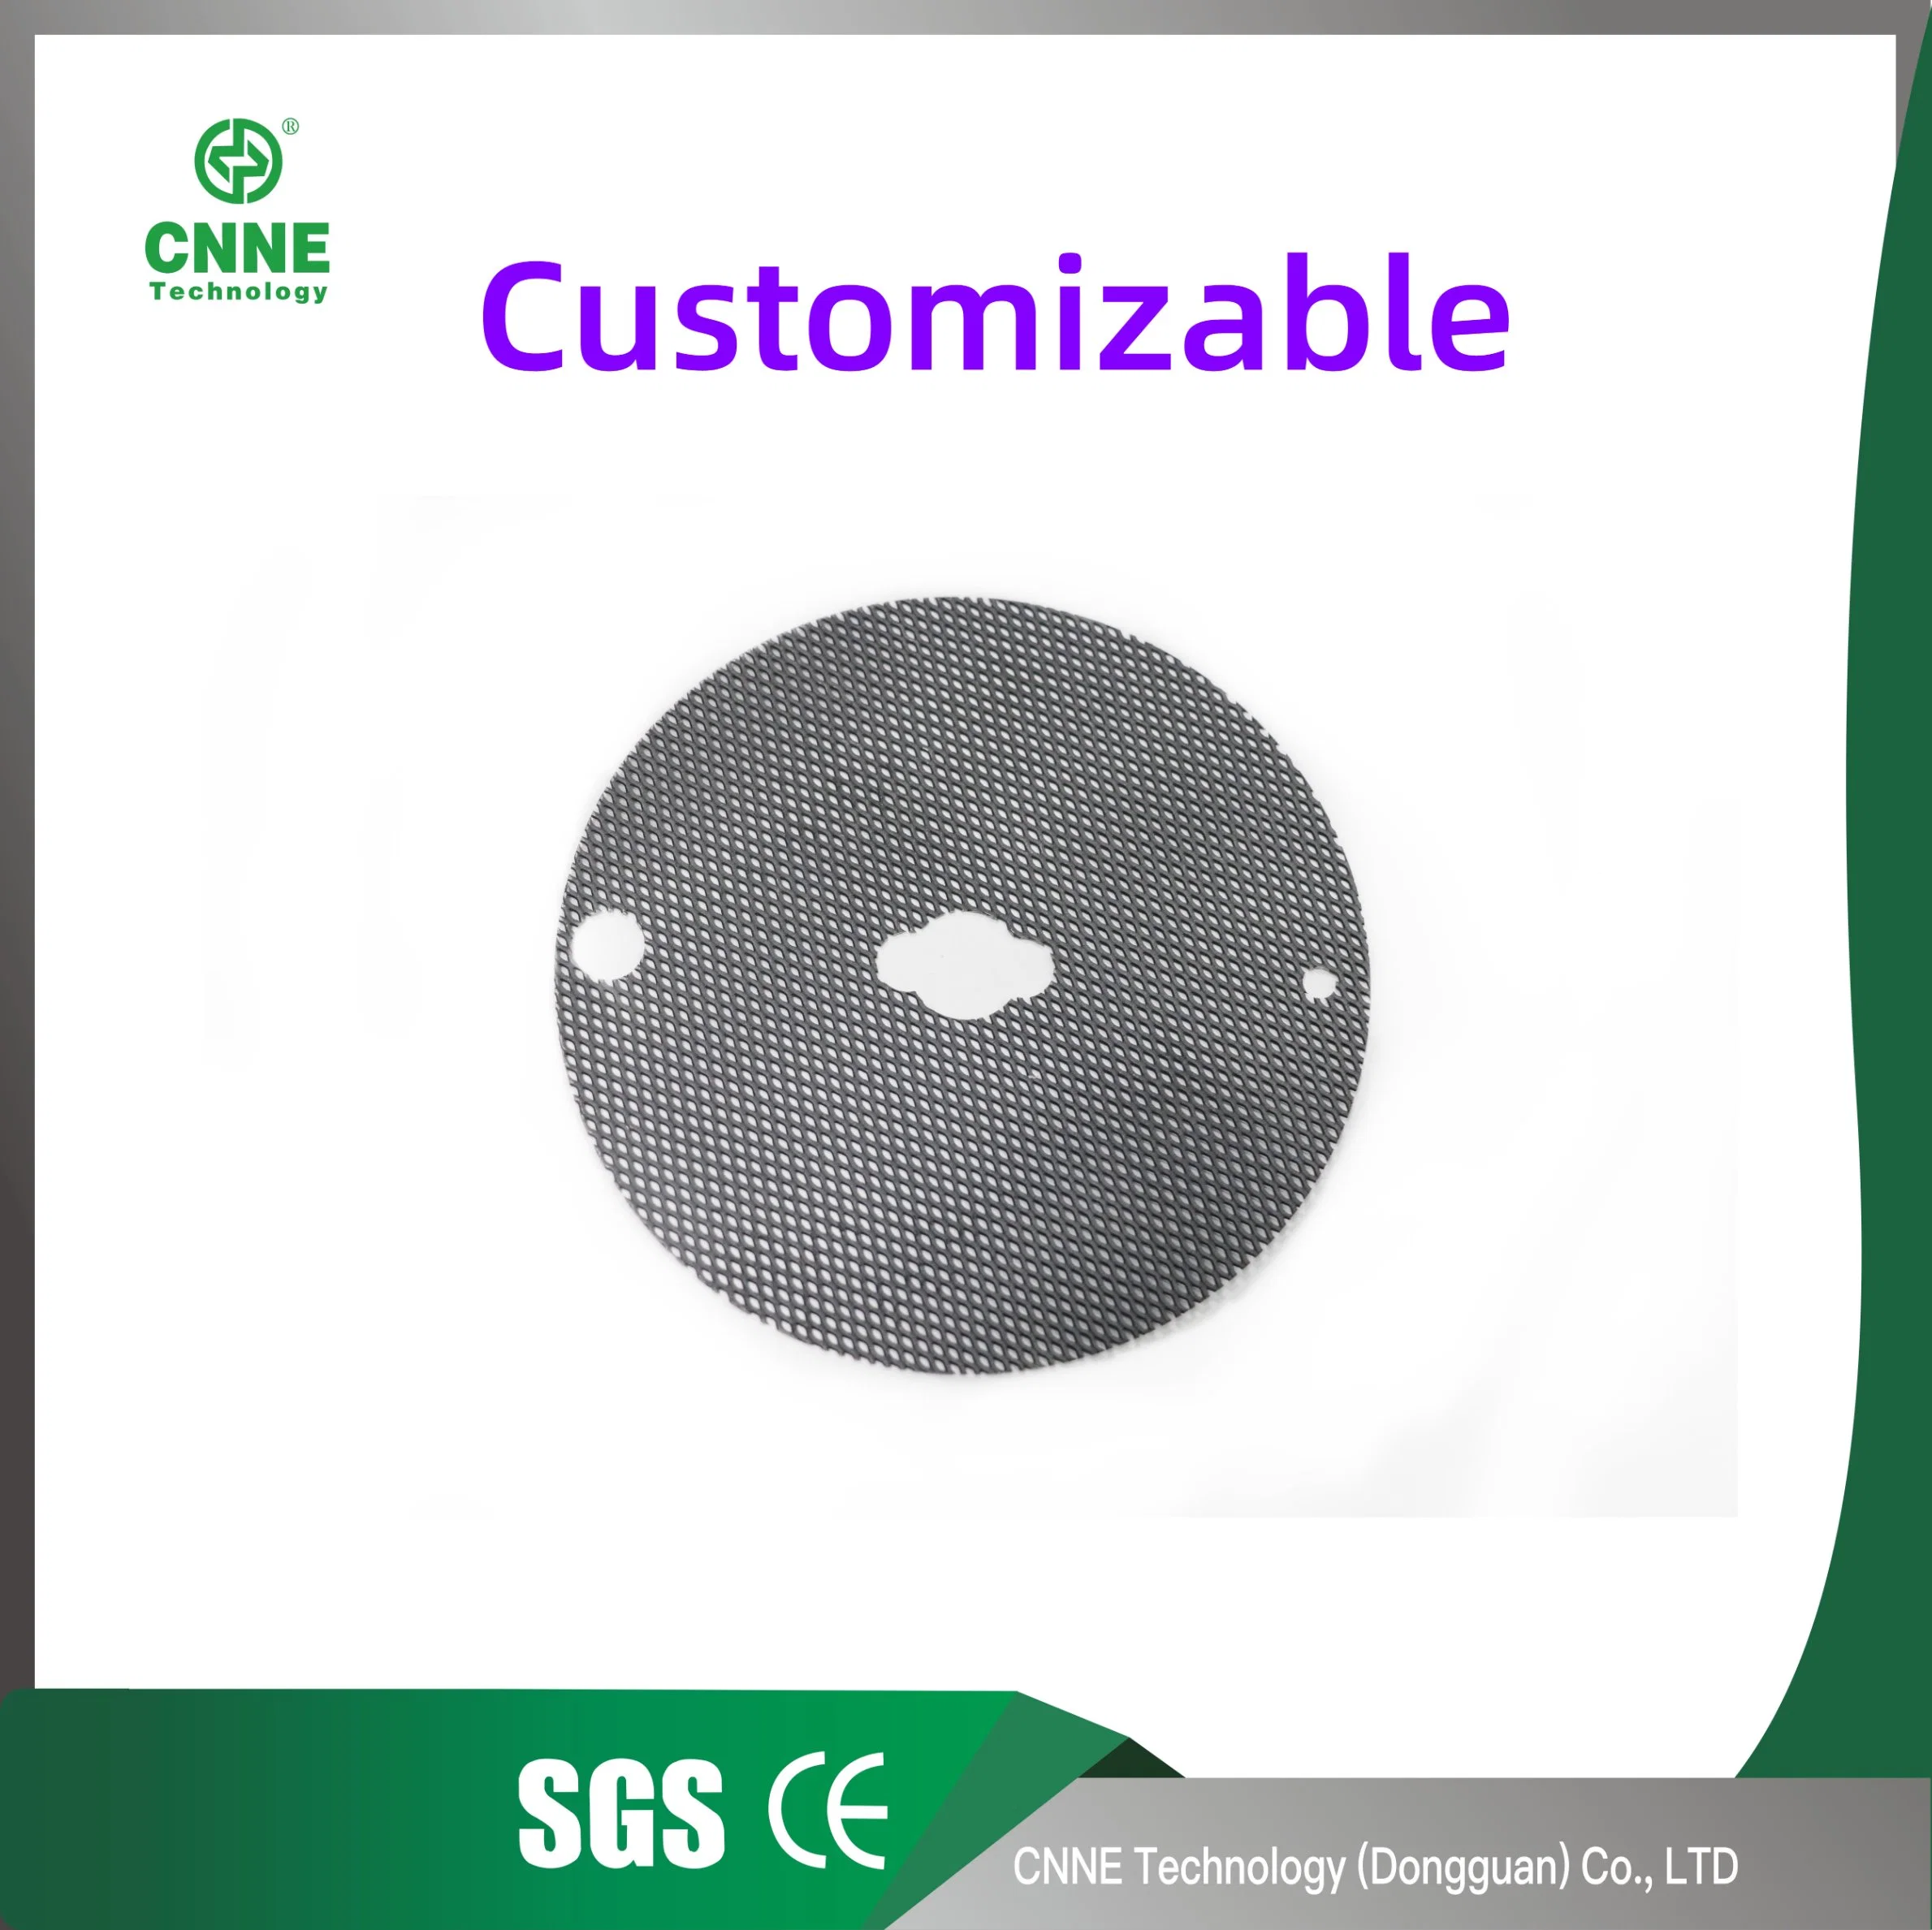 Customizable Industrial Ti Titanium Electrode for Copper Foil Electrolysis with Precious Metal Oxide Coating